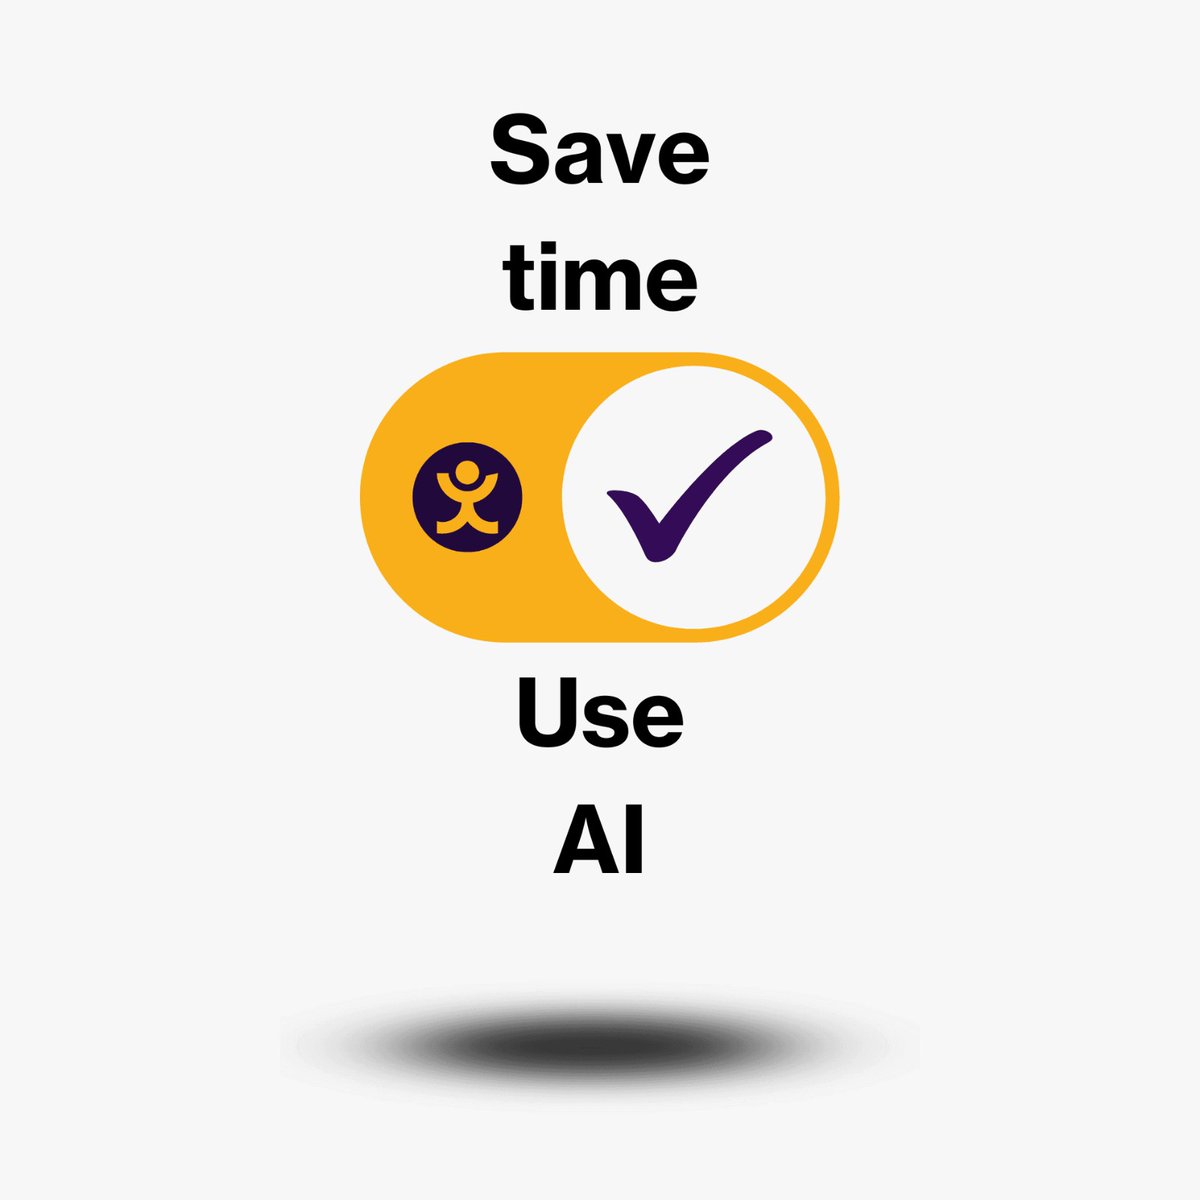 AI Tools for 20 Tasks to replace your daily tedious work:

1. Research

- ChatGPT
- YouChat
- Perplexity
- Copilot
- Gemini

2. Image

- Leap AI
- Copilot
- Segmind
- Midjourney
- Stable Diffusion

3. CopyWriting

- Rytr
- Copy AI
- Writesonic
- Adcreative AI

4. Writing

-